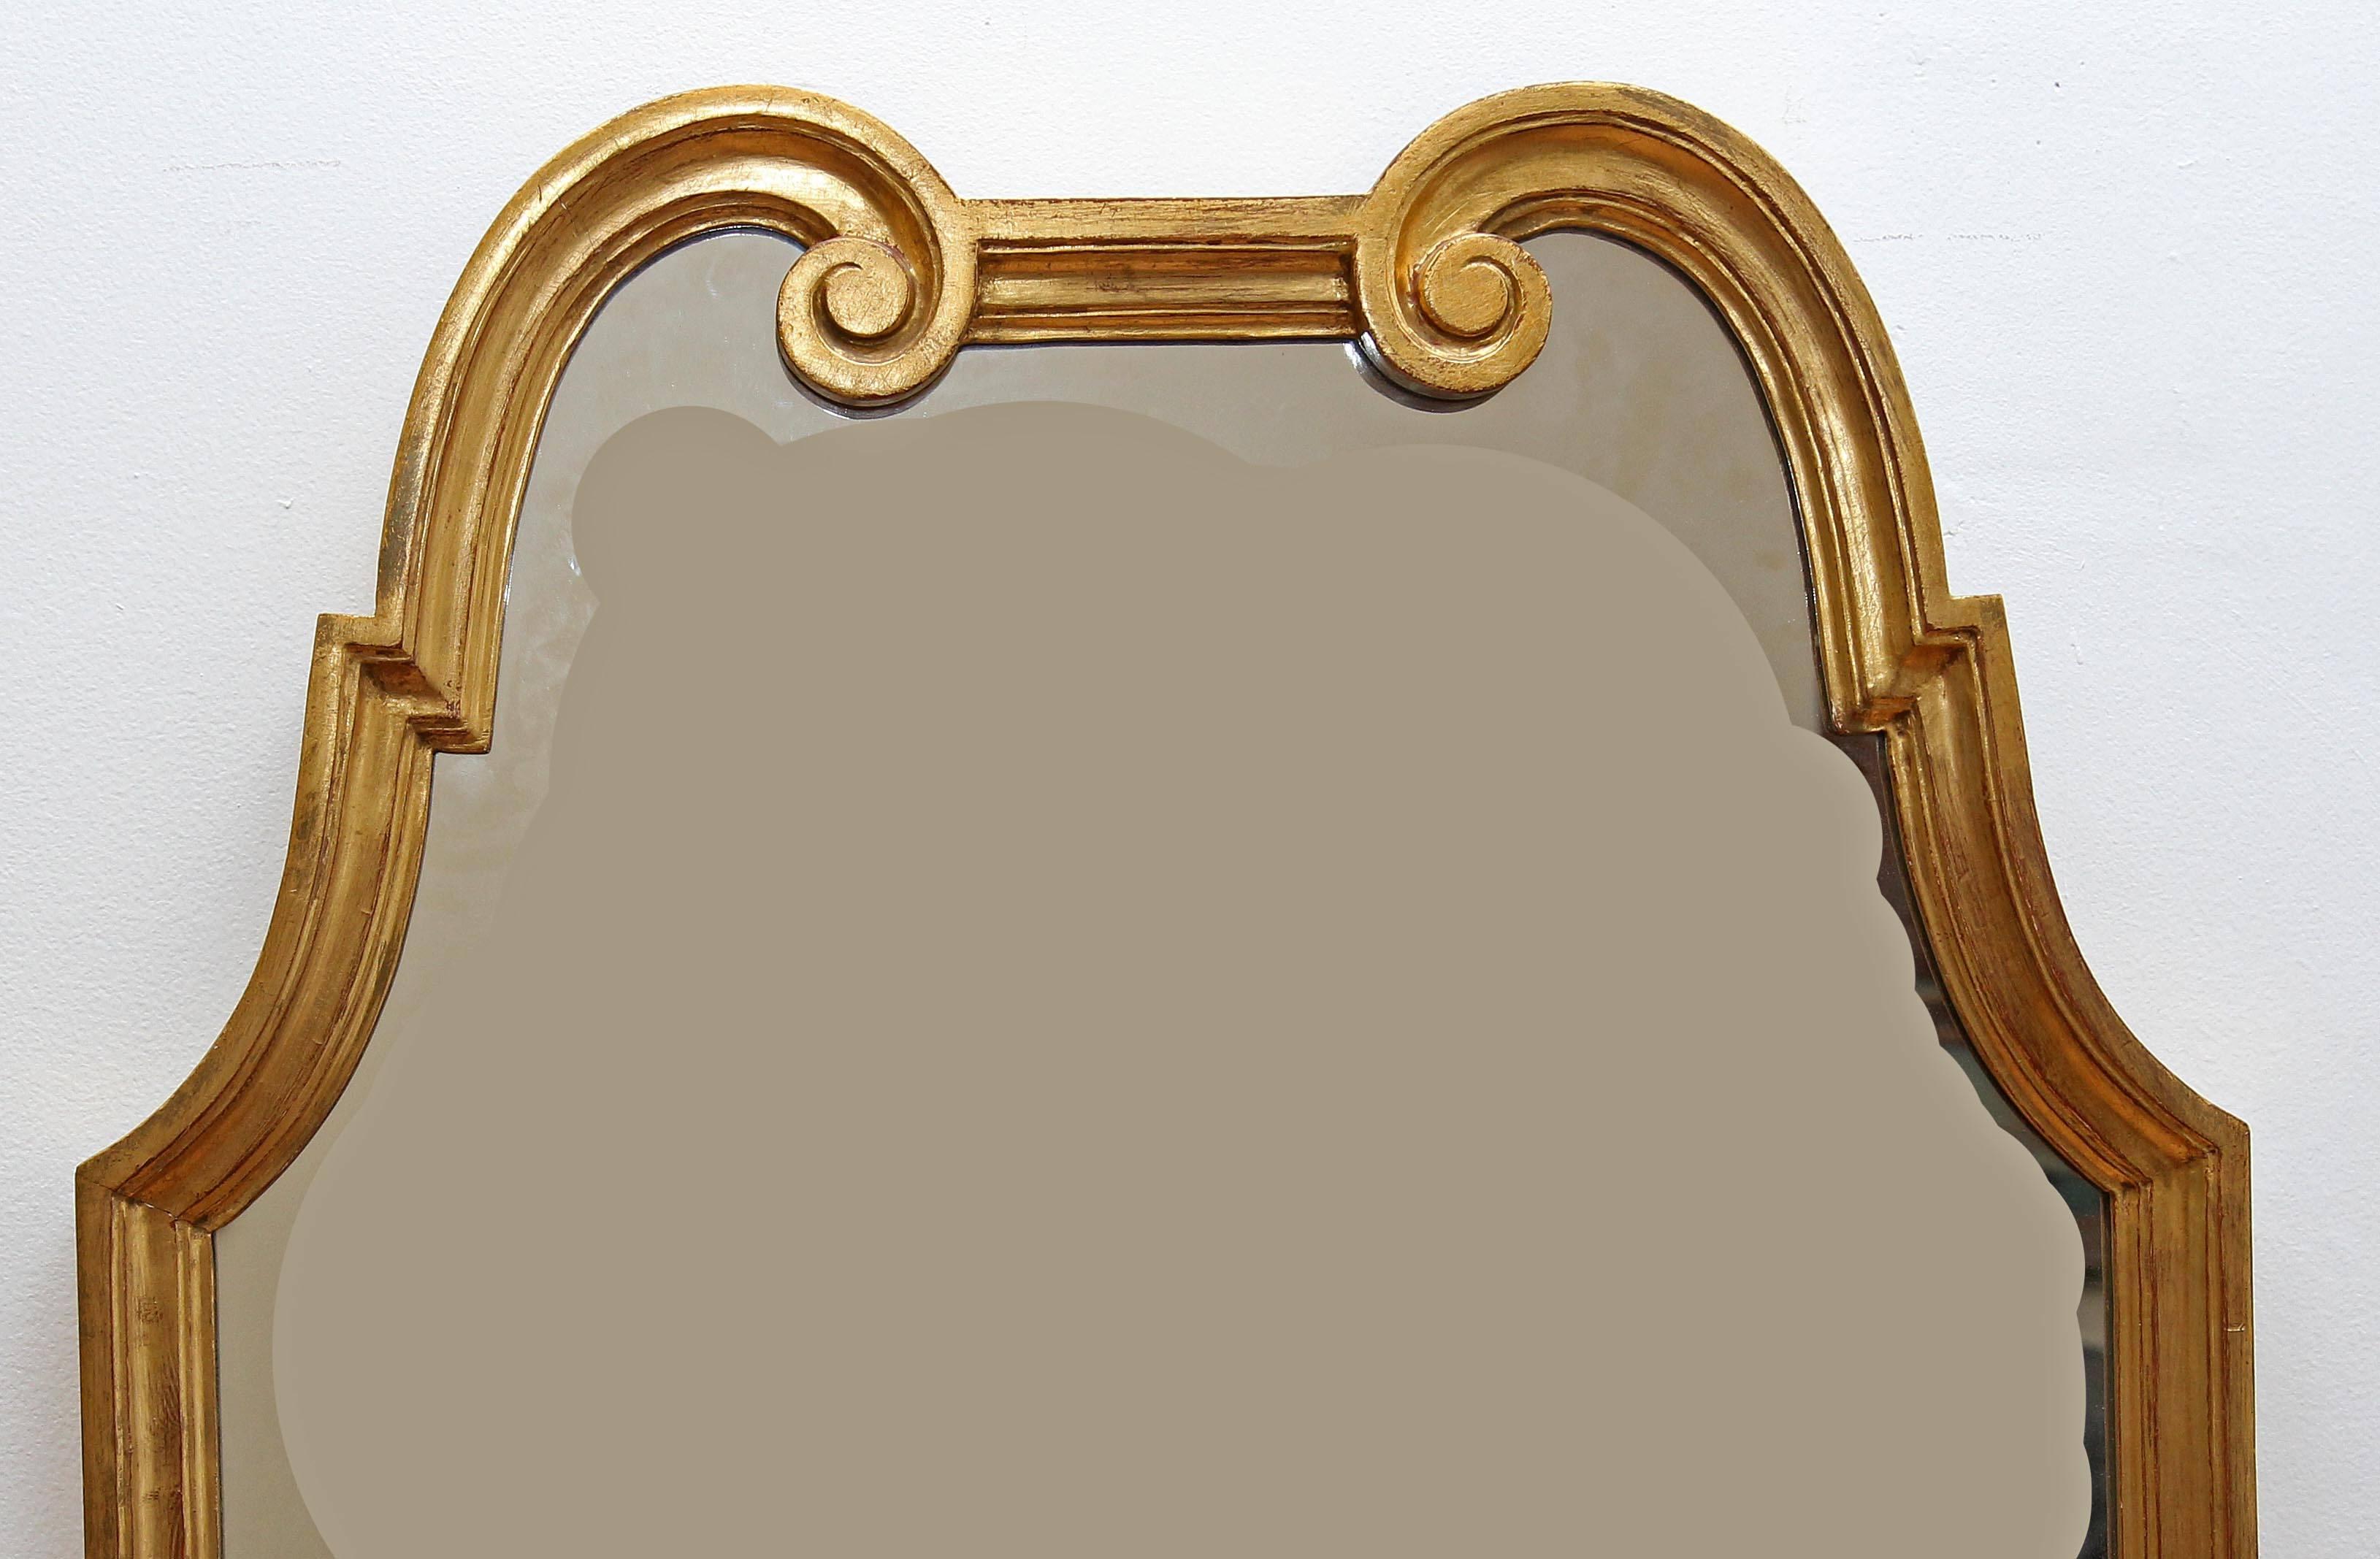 Vintage Mid-Century Modern giltwood console mirror. Excellent quality gilding. Measure: 53